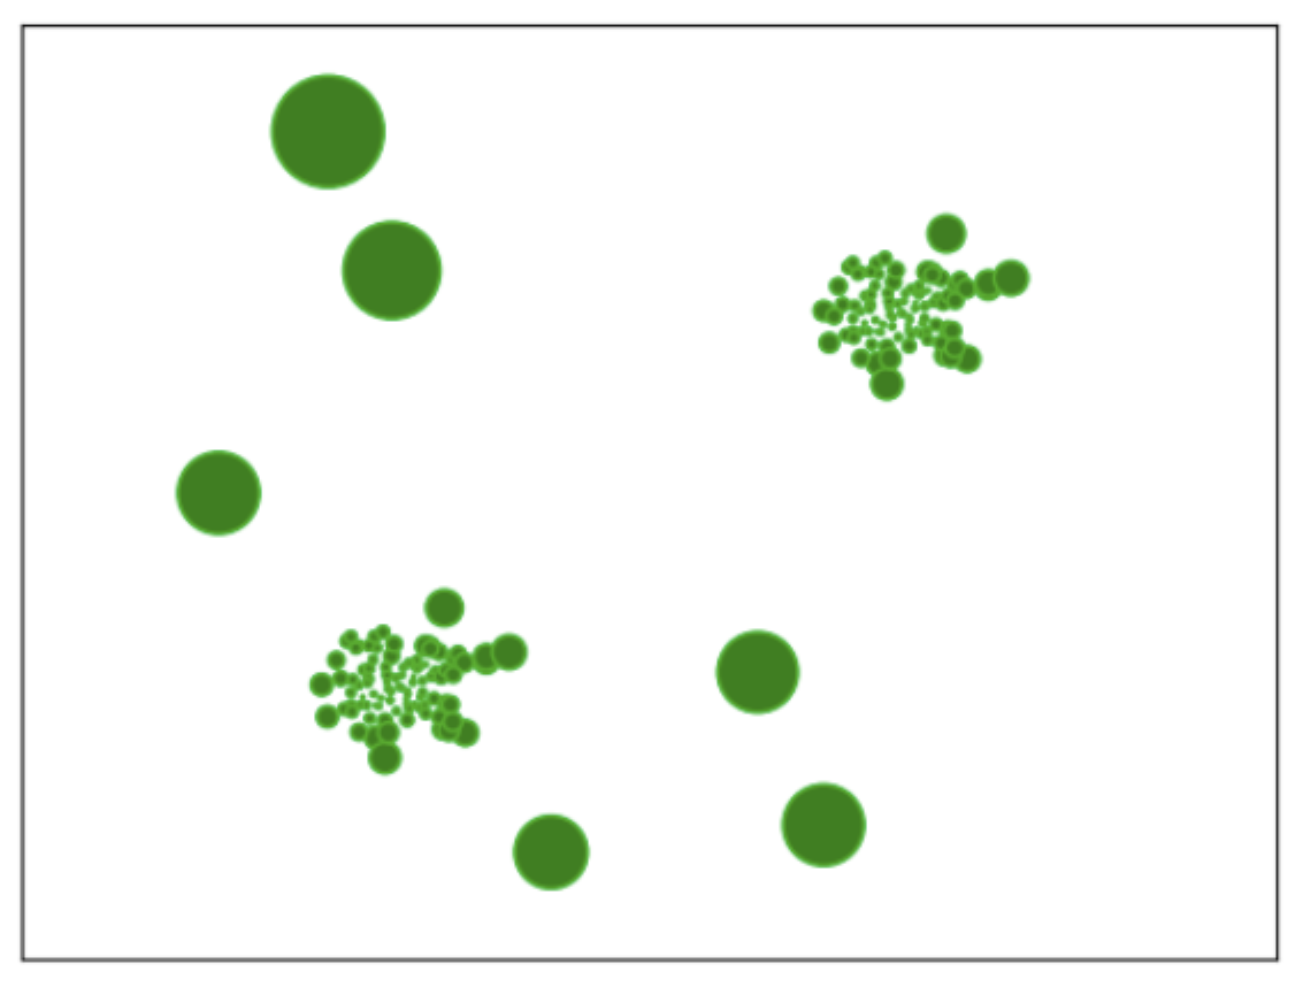 The Local Outlier Factor algorithm applied to a set of entities. The size of each circle represents its outlier score